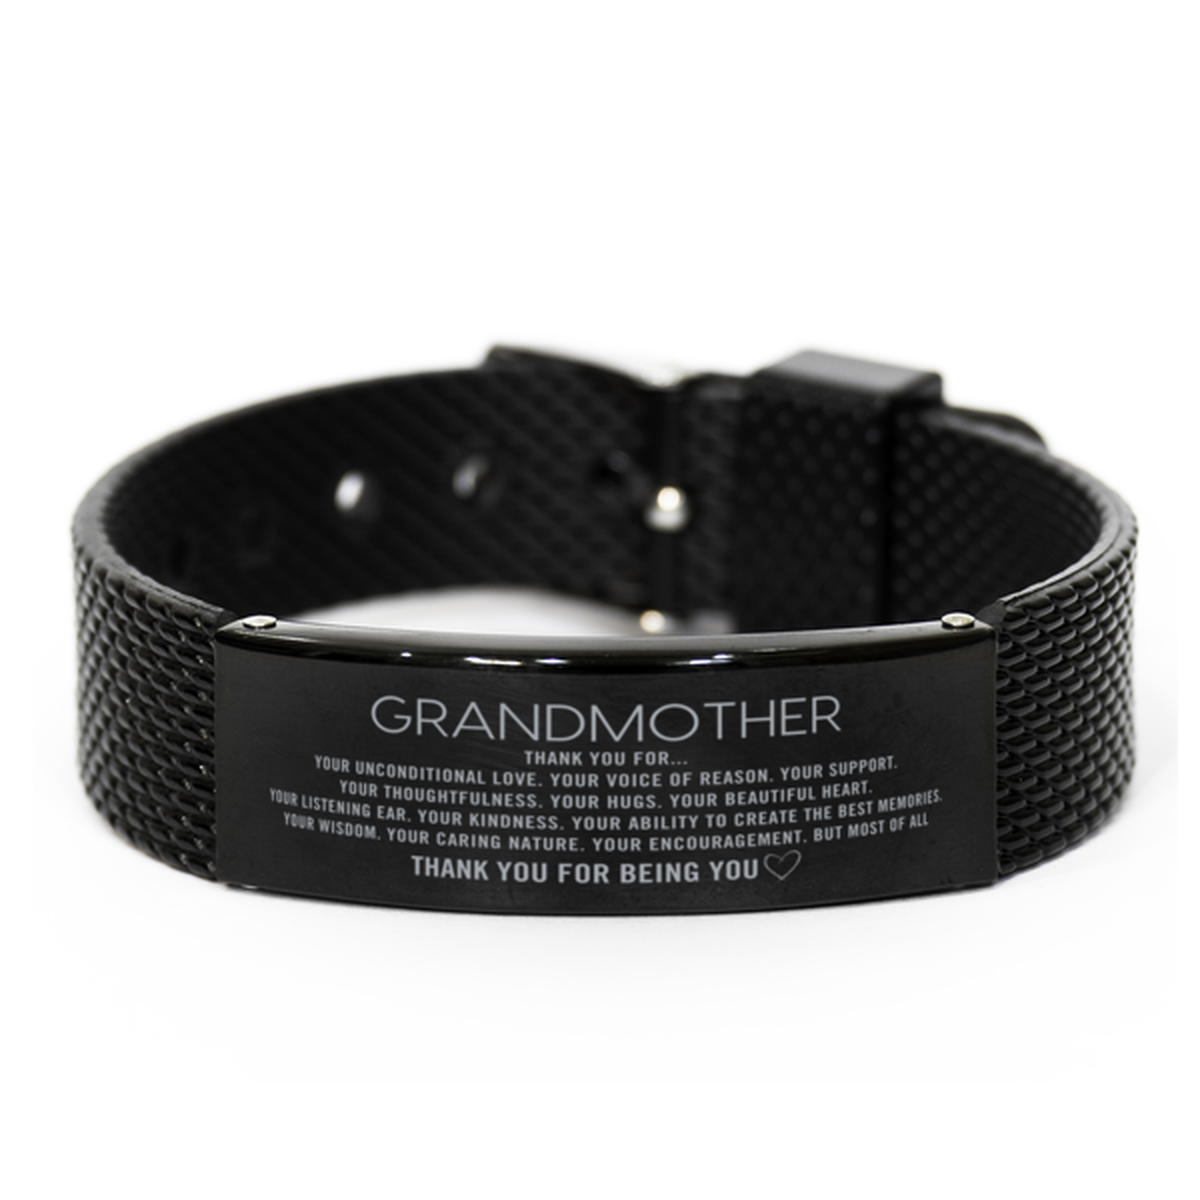 Grandmother Black Shark Mesh Bracelet Custom, Engraved Gifts For Grandmother Christmas Graduation Birthday Gifts for Men Women Grandmother Thank you for Your unconditional love